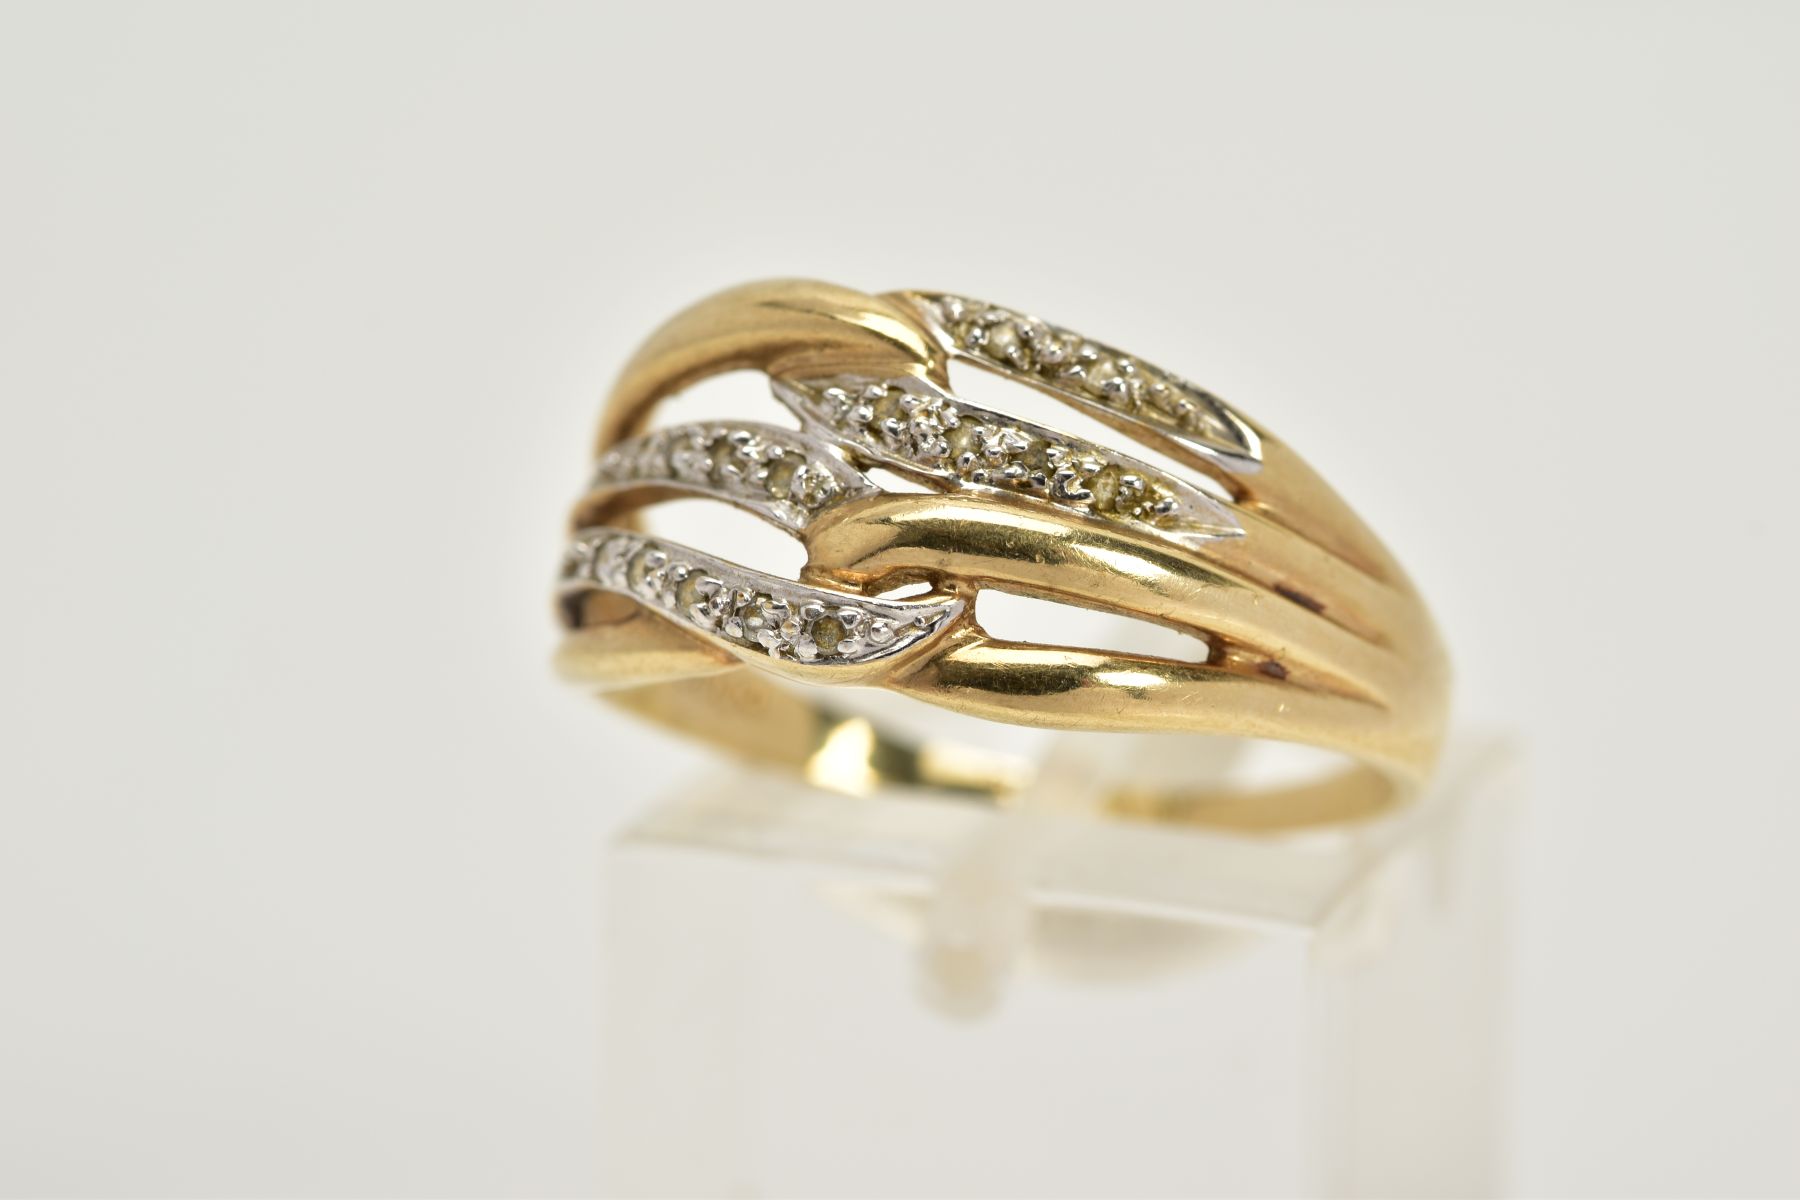 A 9CT GOLD DIAMOND OPENWORK RING, designed with four interlocking openwork hoops, two hoops set with